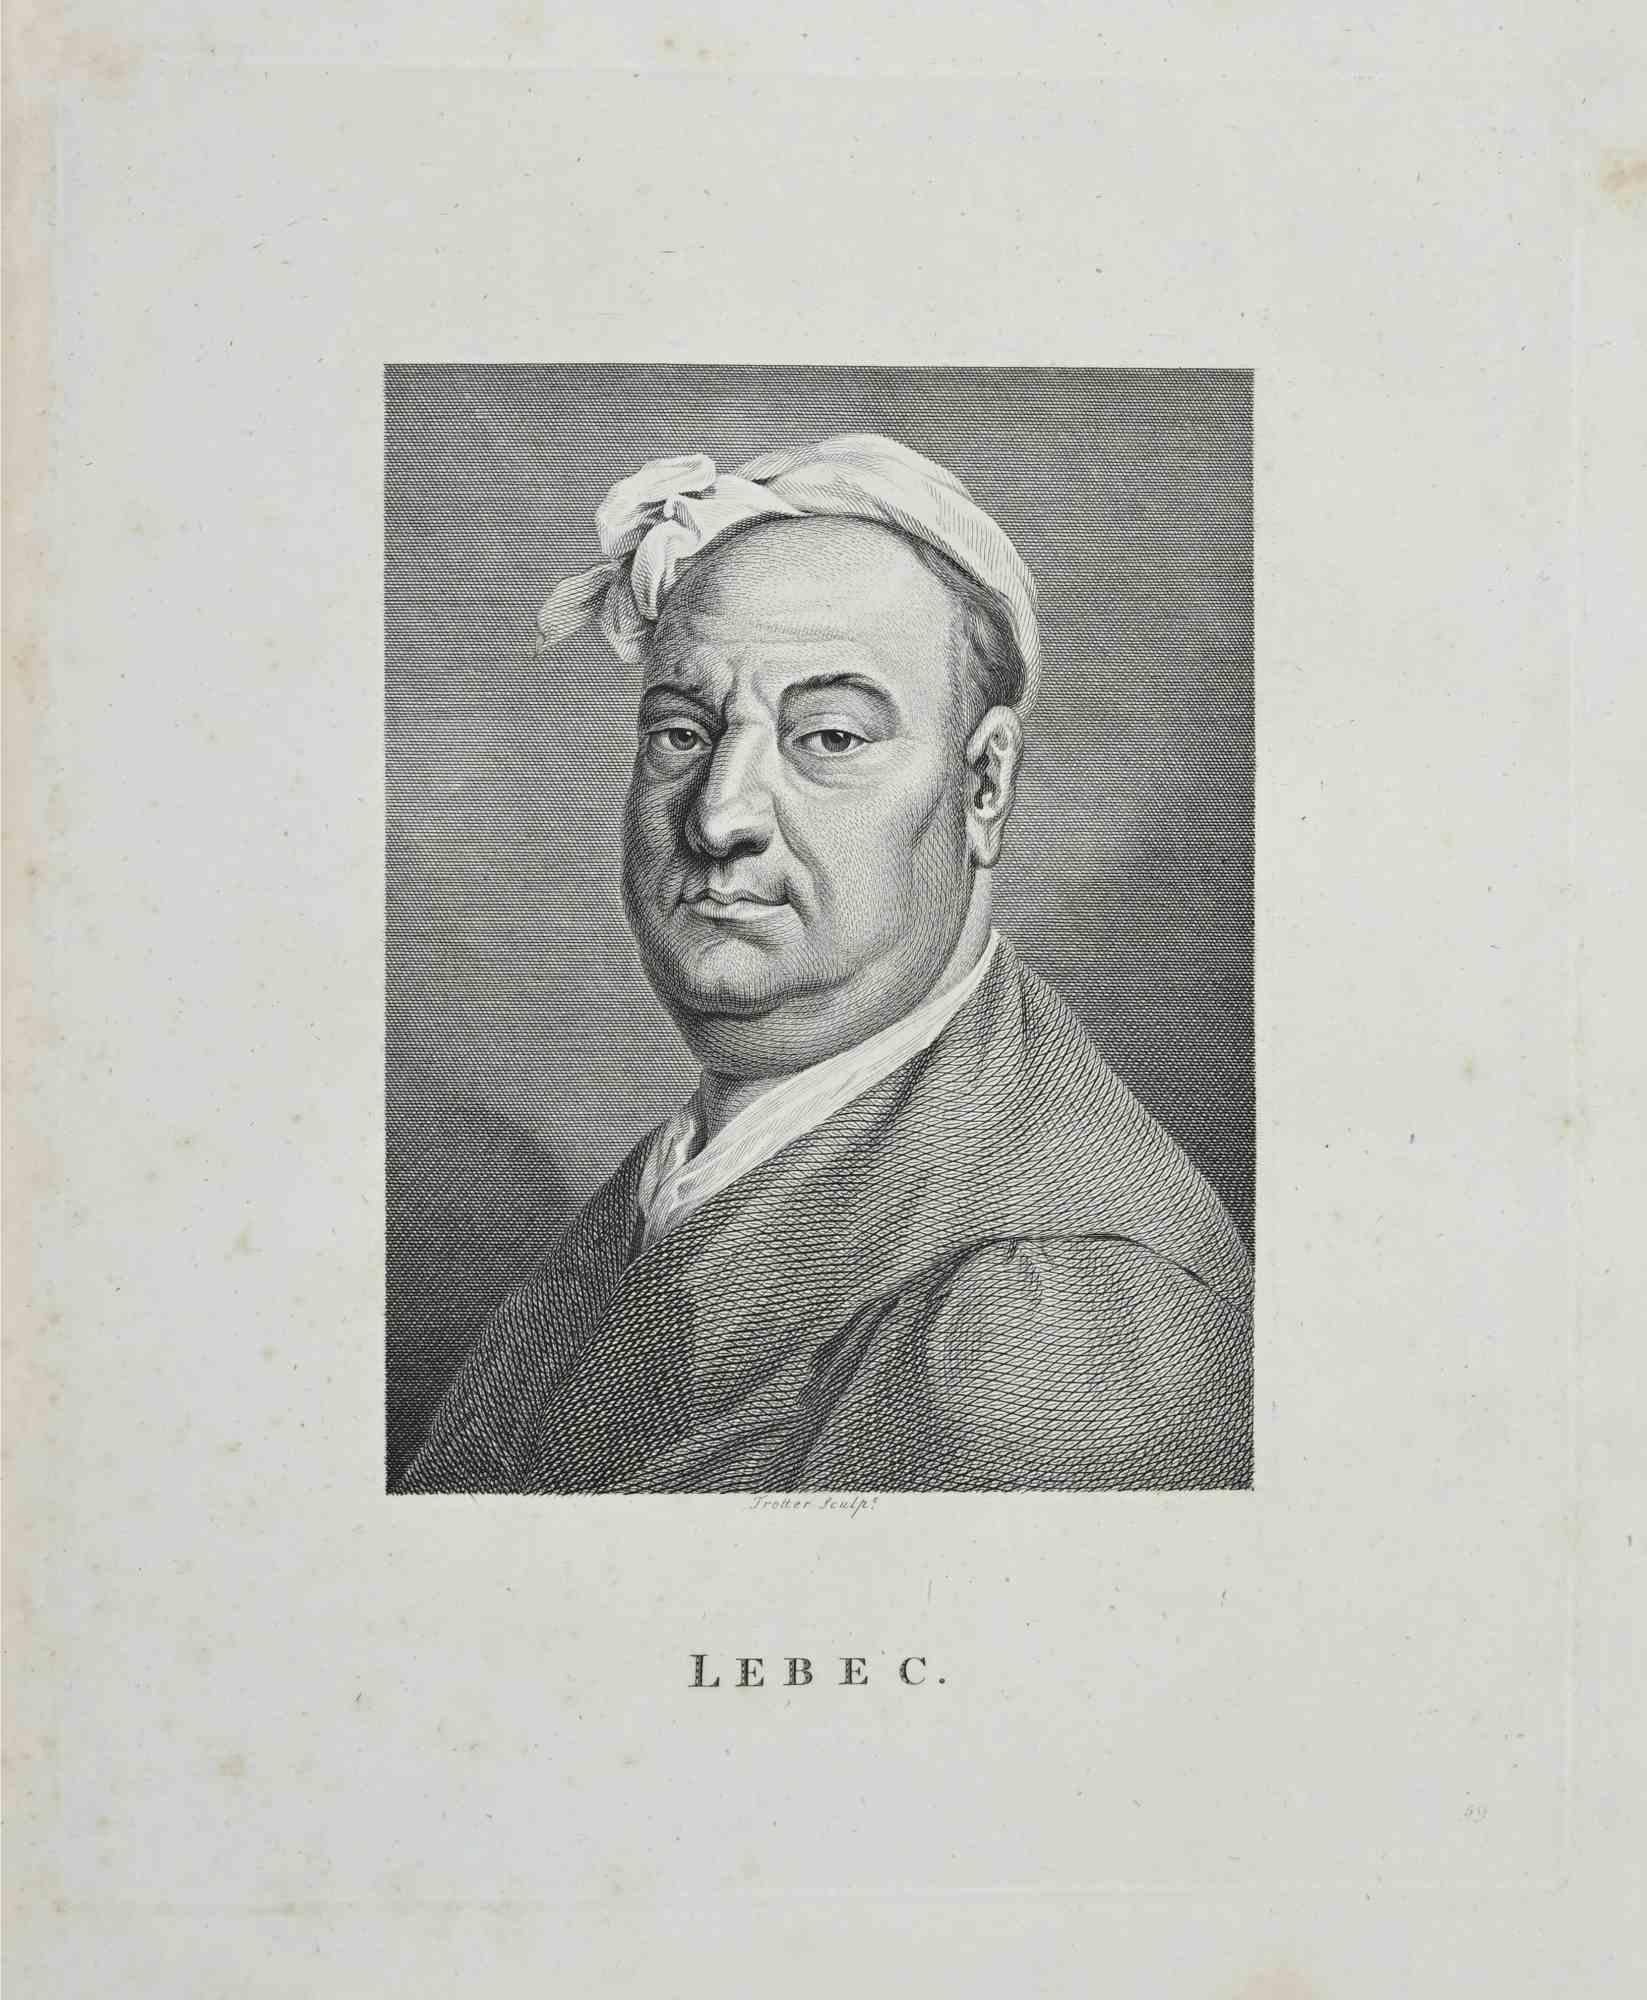 Portrait of Lebec - Original Etching by Thomas Holloway - 1810